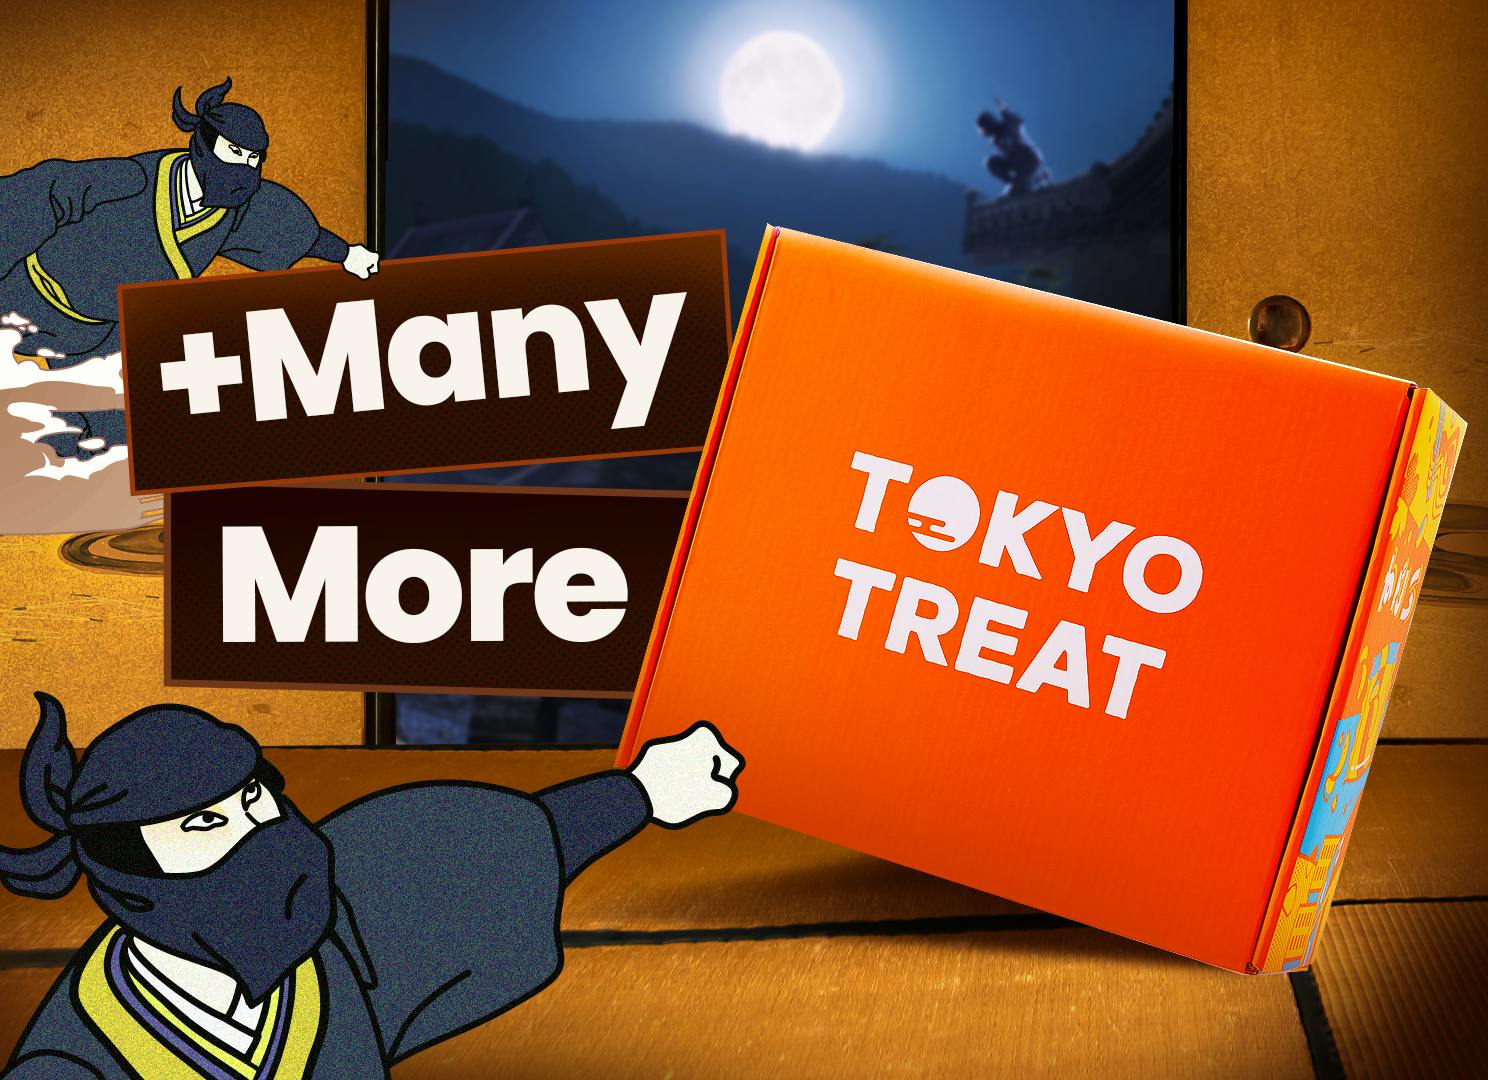 The TokyoTreat box sits on the tatami mats of an old Japanese old, surrounded by ninja.